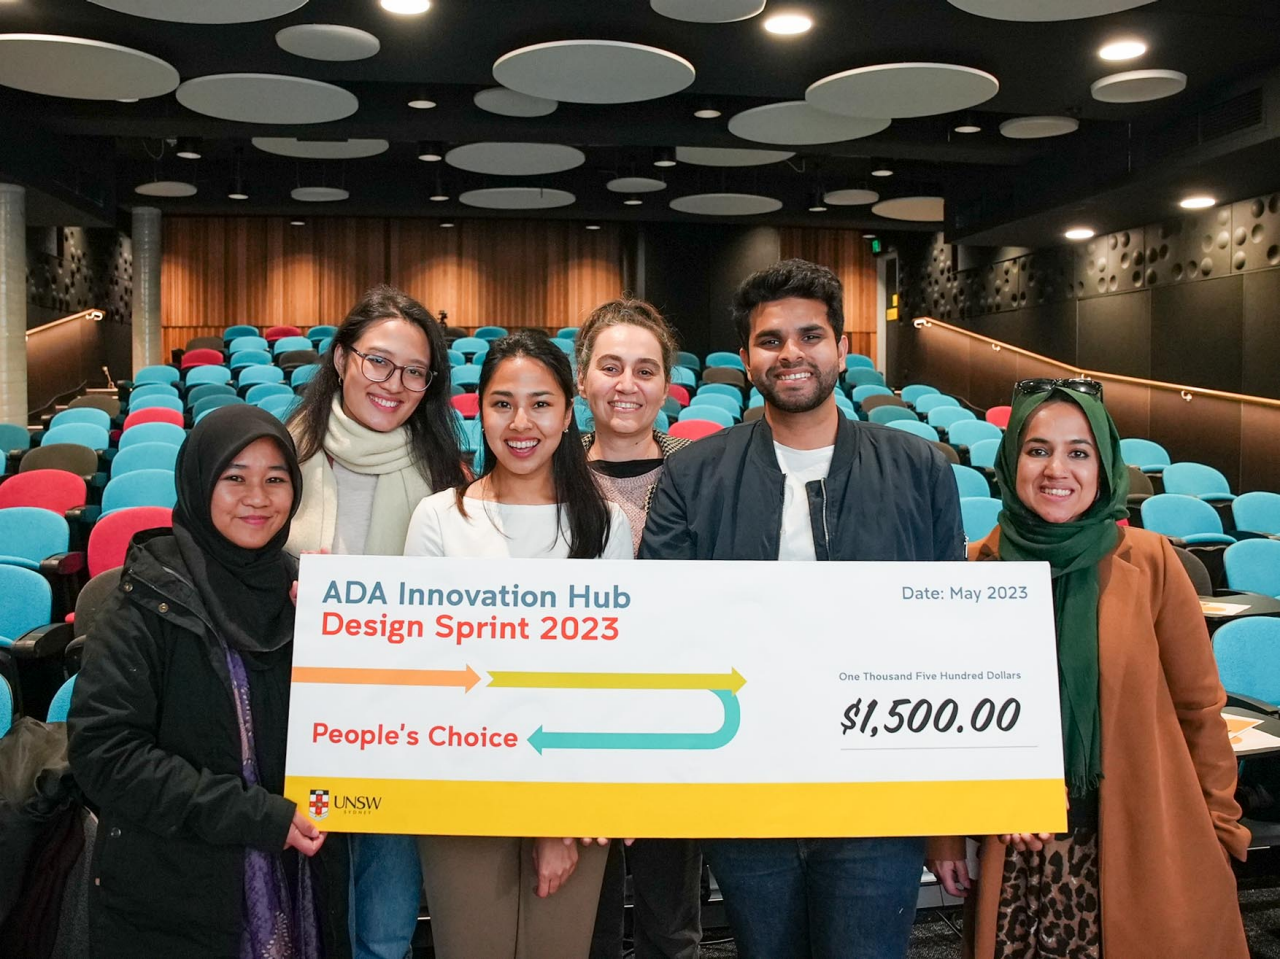 People's choice award winning team from ADA Innovation Hub Design Sprint 2023 hold giant novelty cheque